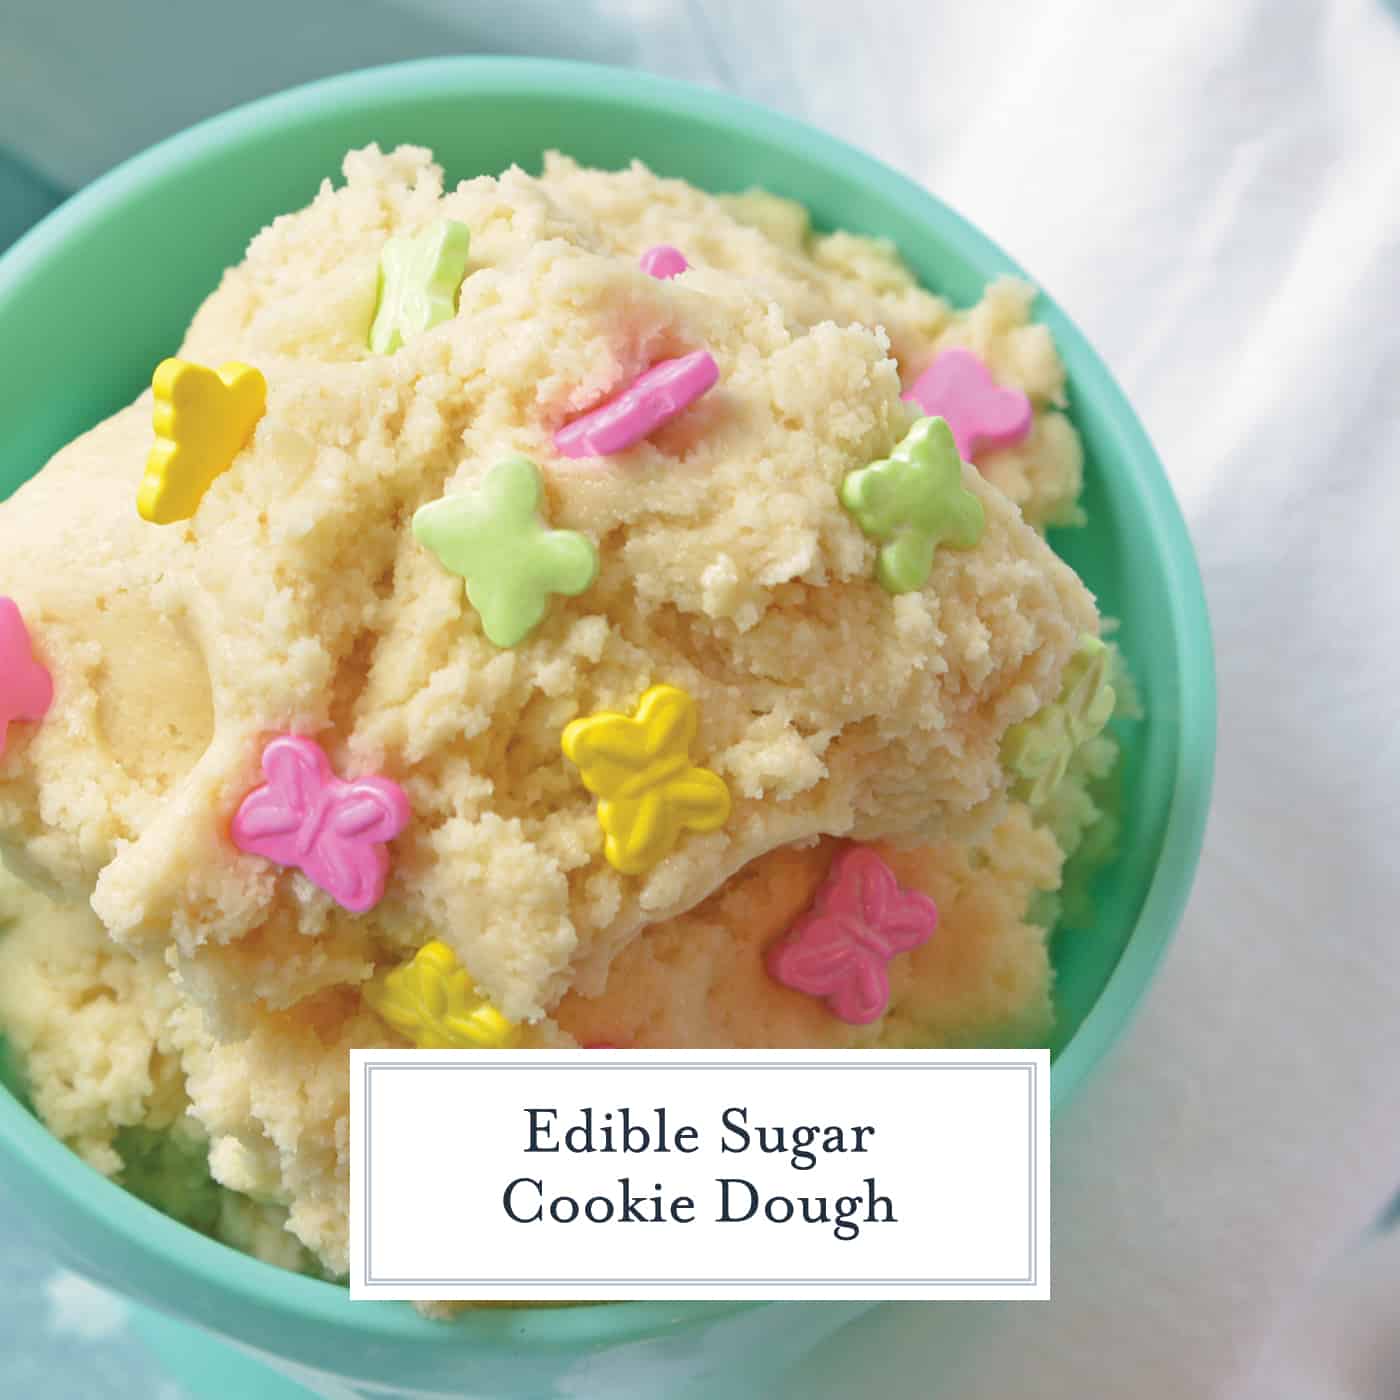 Desserts for one don't get easier than this edible sugar cookie dough.  With only a few ingredients, it's an easy dessert when you need a little pick me up! #ediblecookiedough #howtomakeediblecookiedough #ediblesugarcookiedough www.savoryexperiments.com